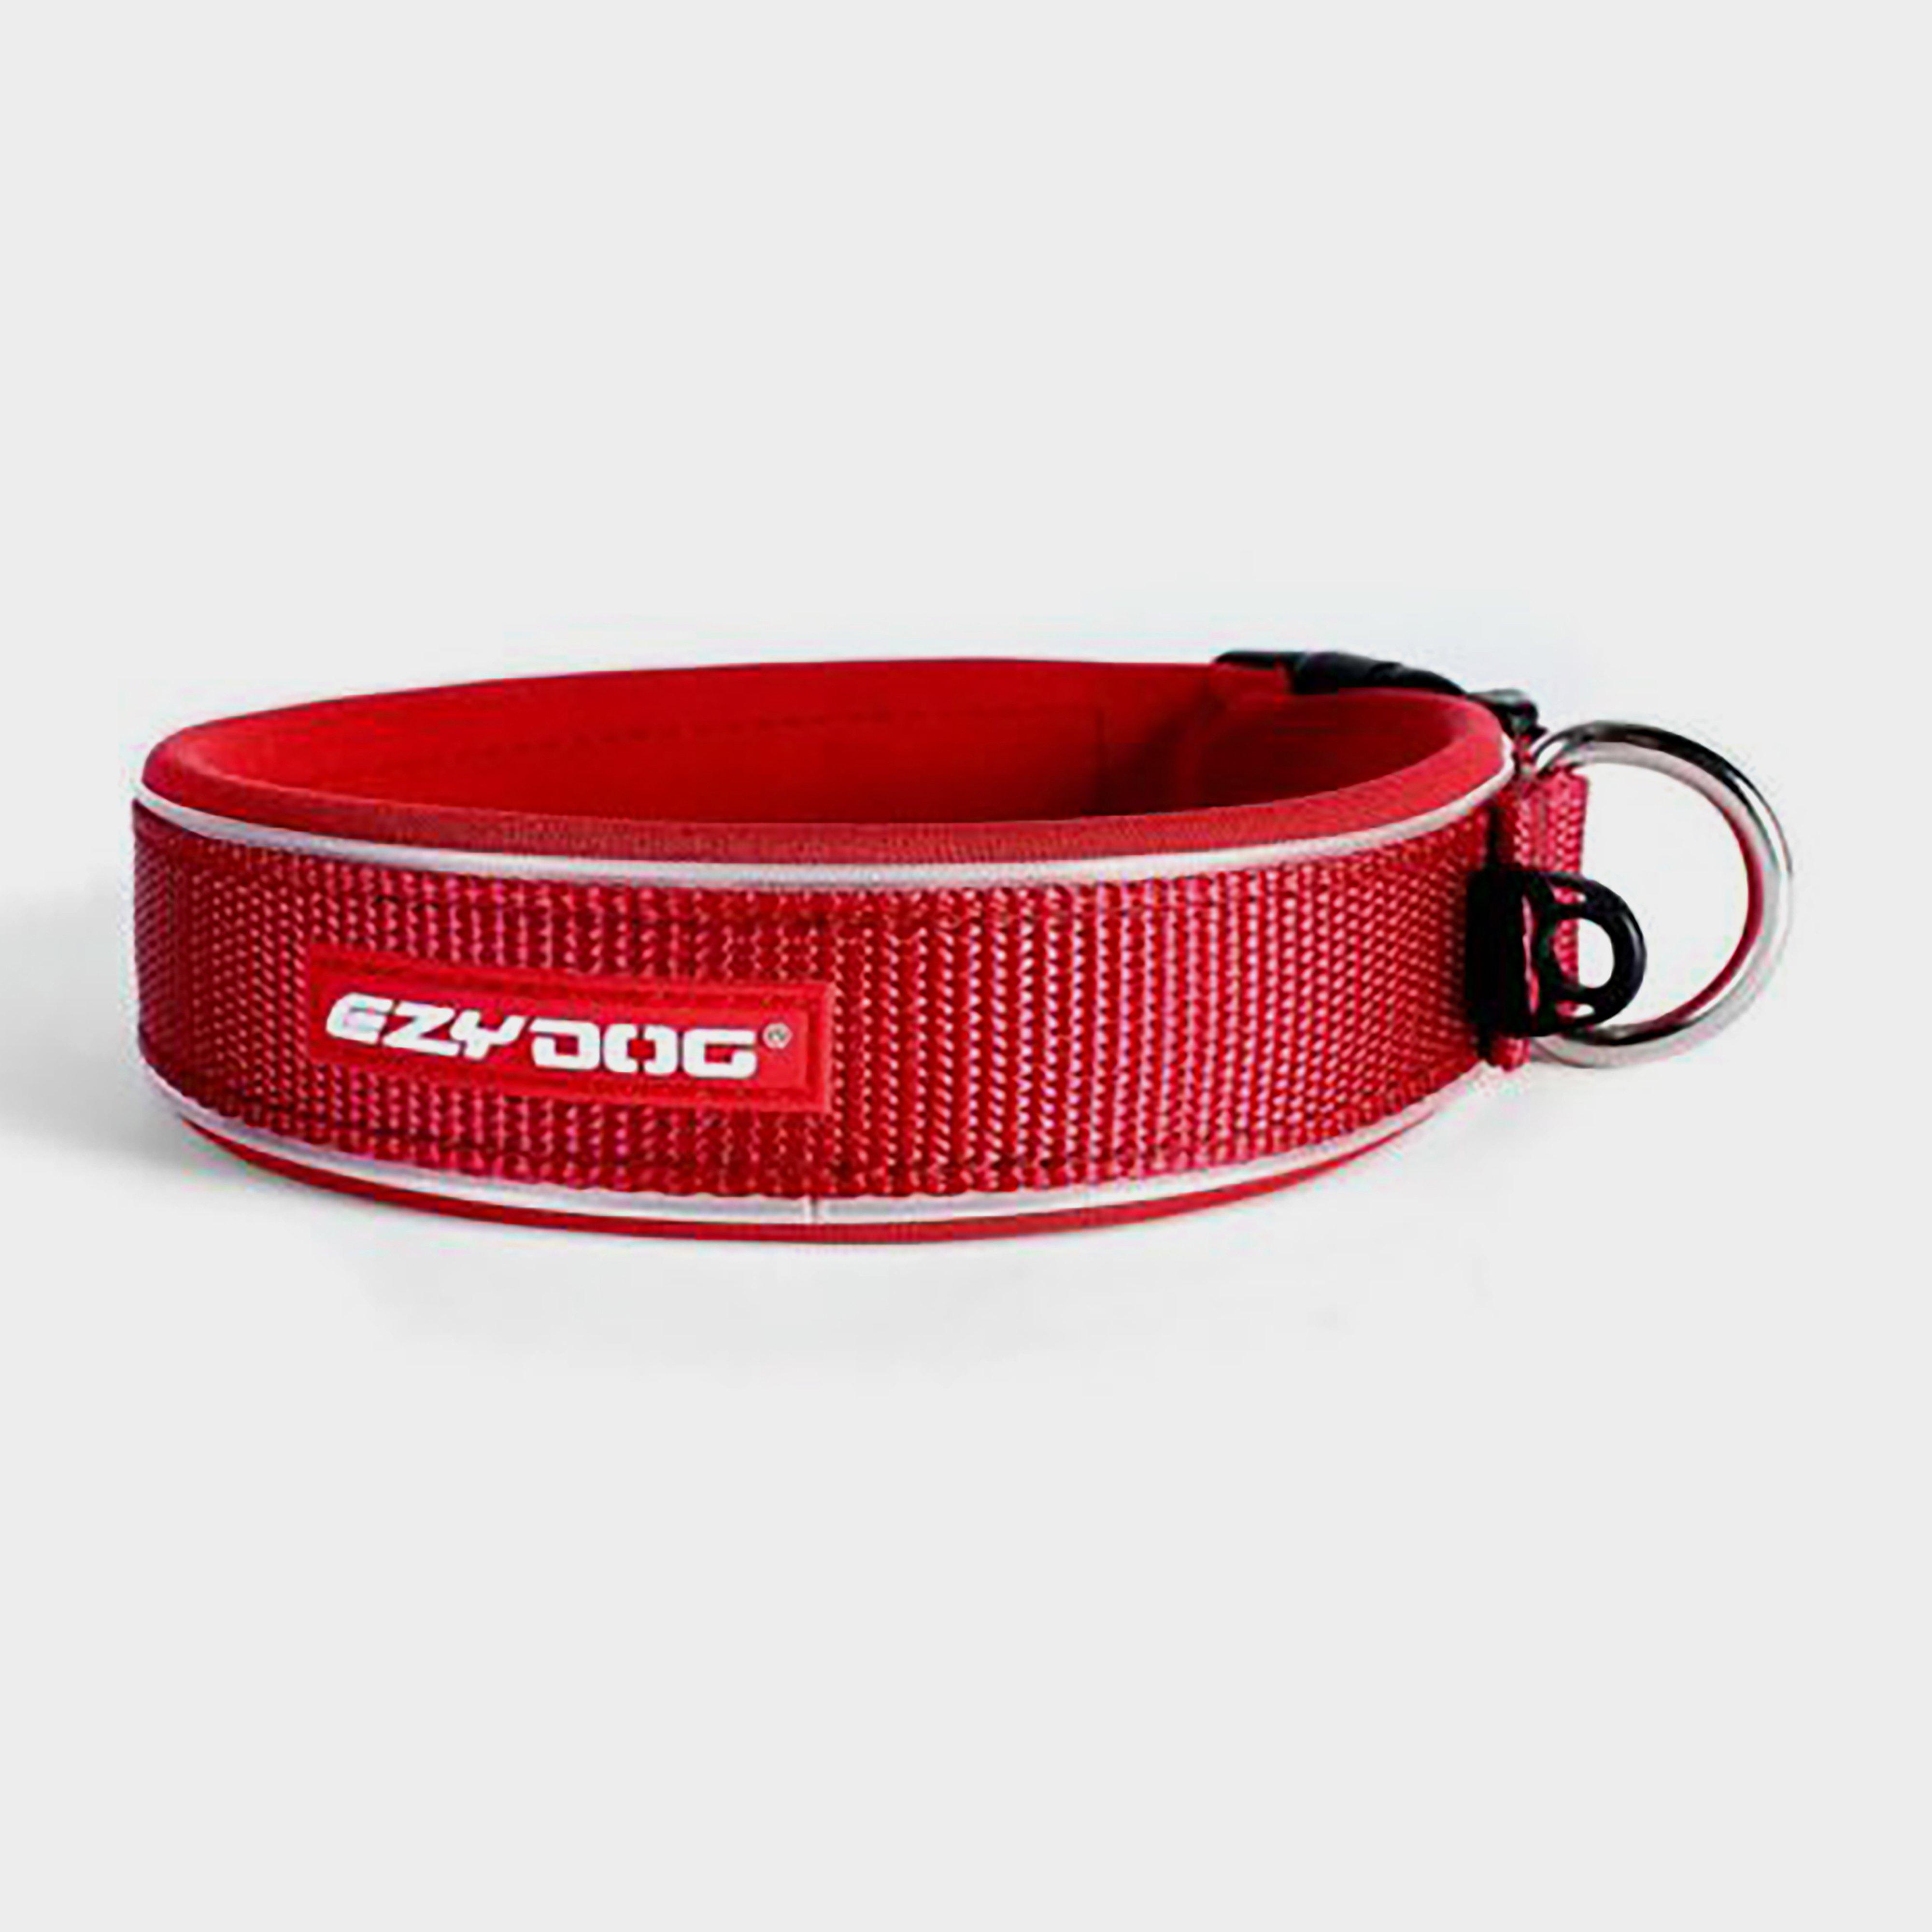 Ezy-dog Classic Neo Collar Small - Red/red  Red/red